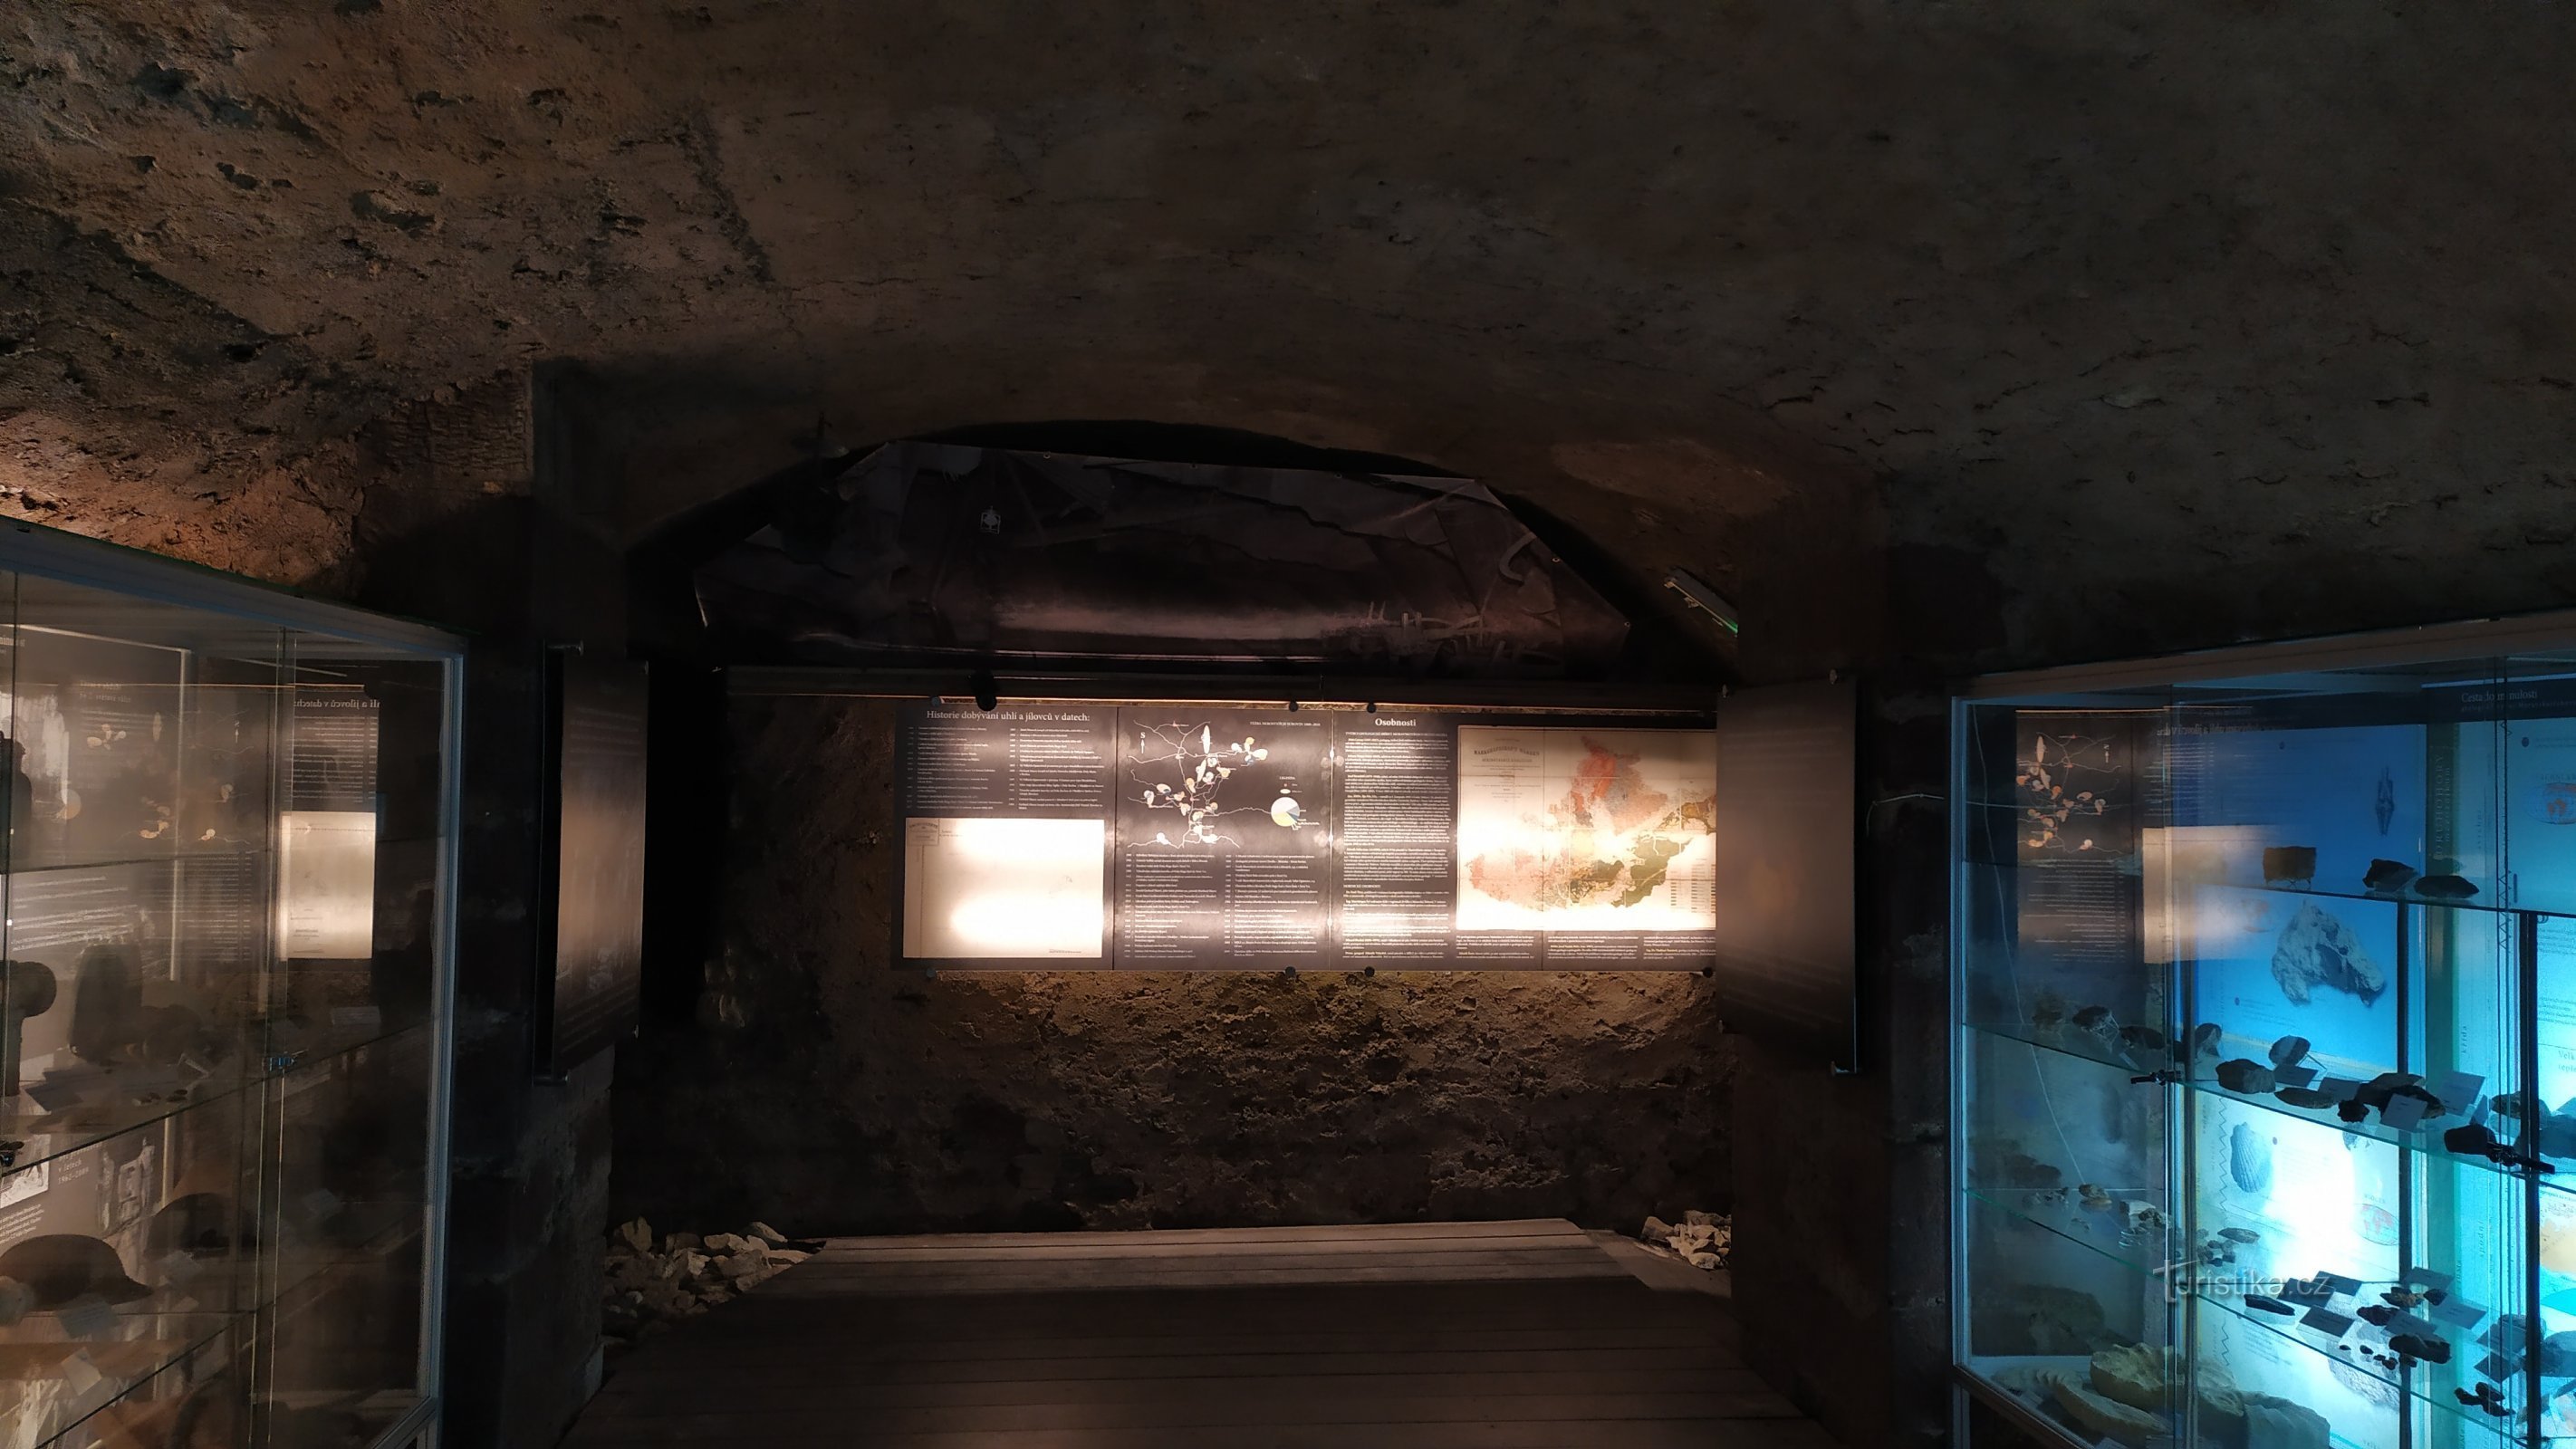 The exhibition is located in the remains of the cellar of the old castle